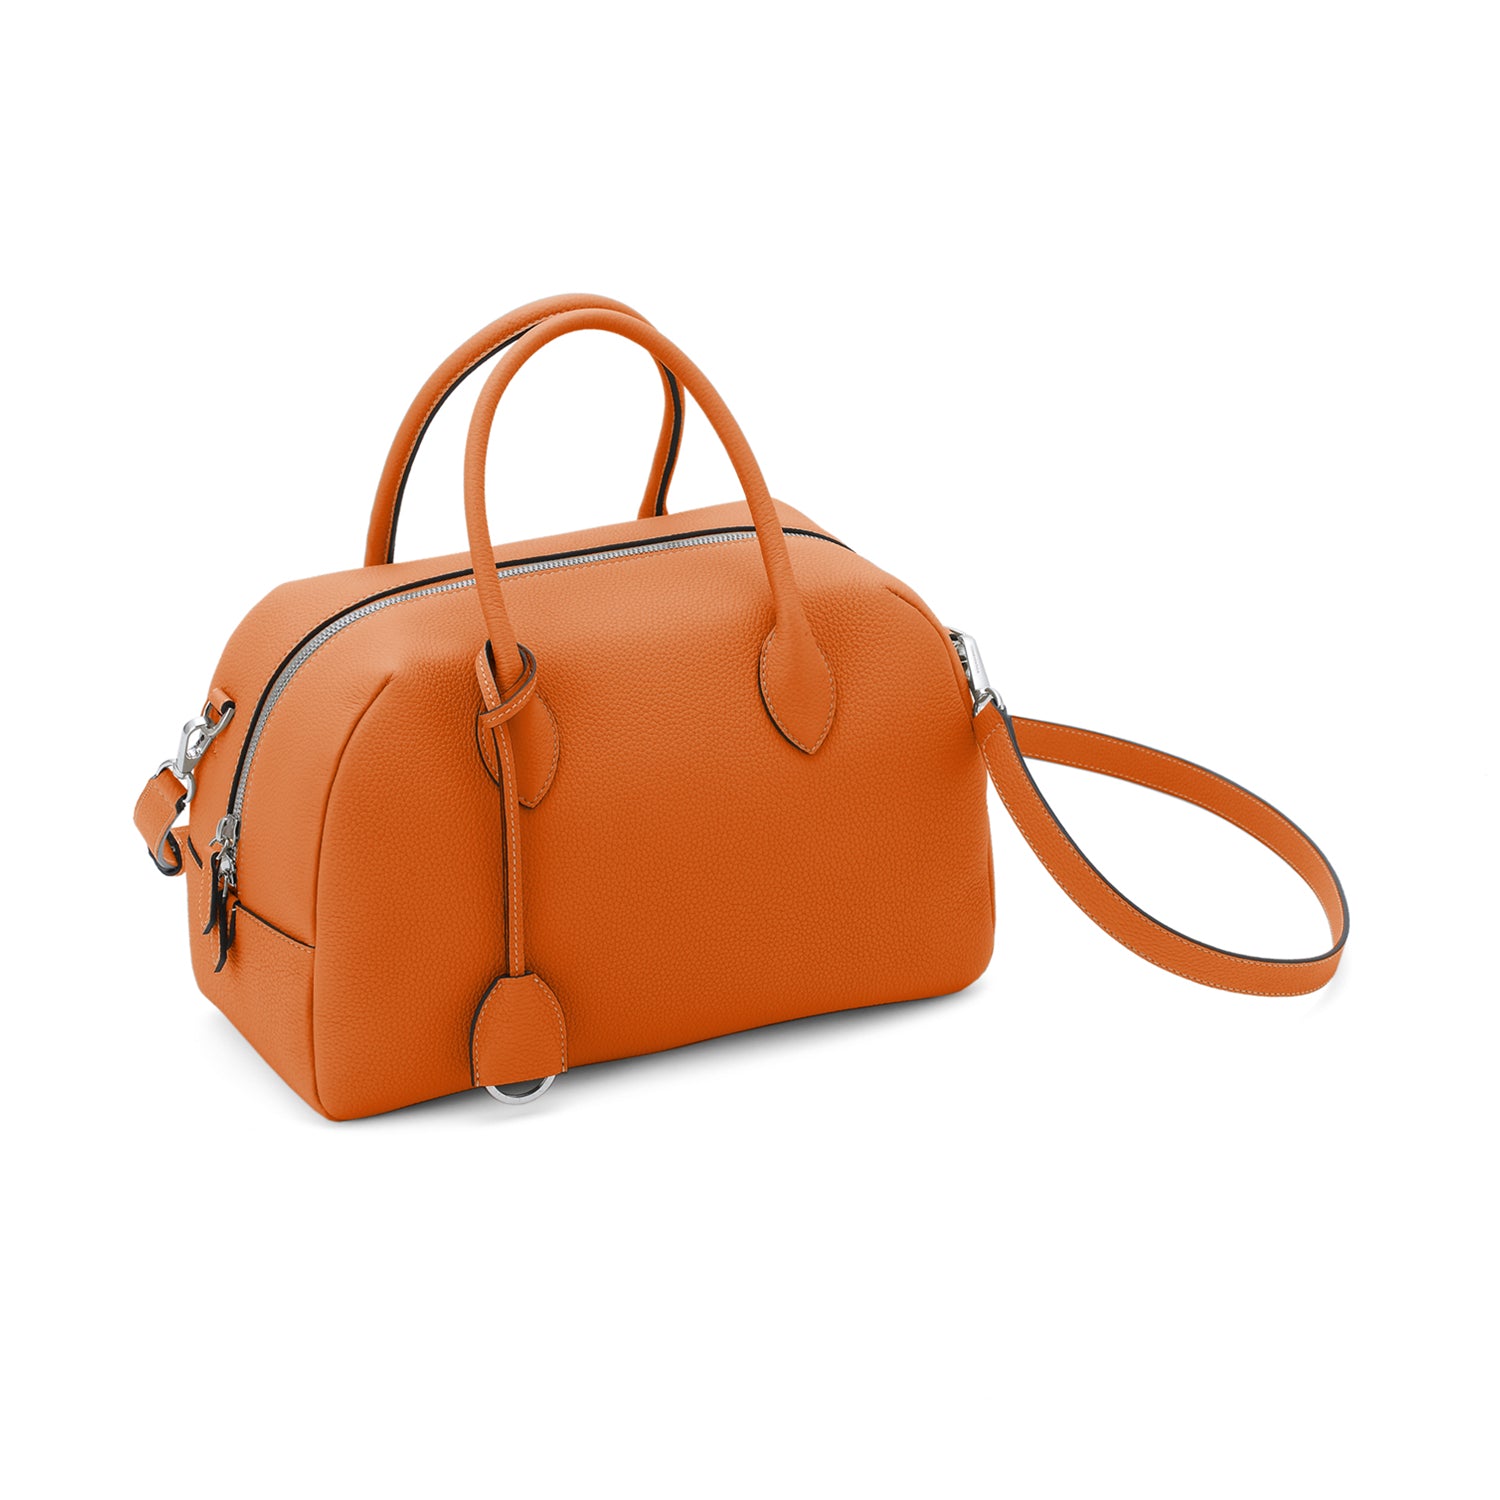 Ava Boston Bag in Shrink Leather (30 Small)